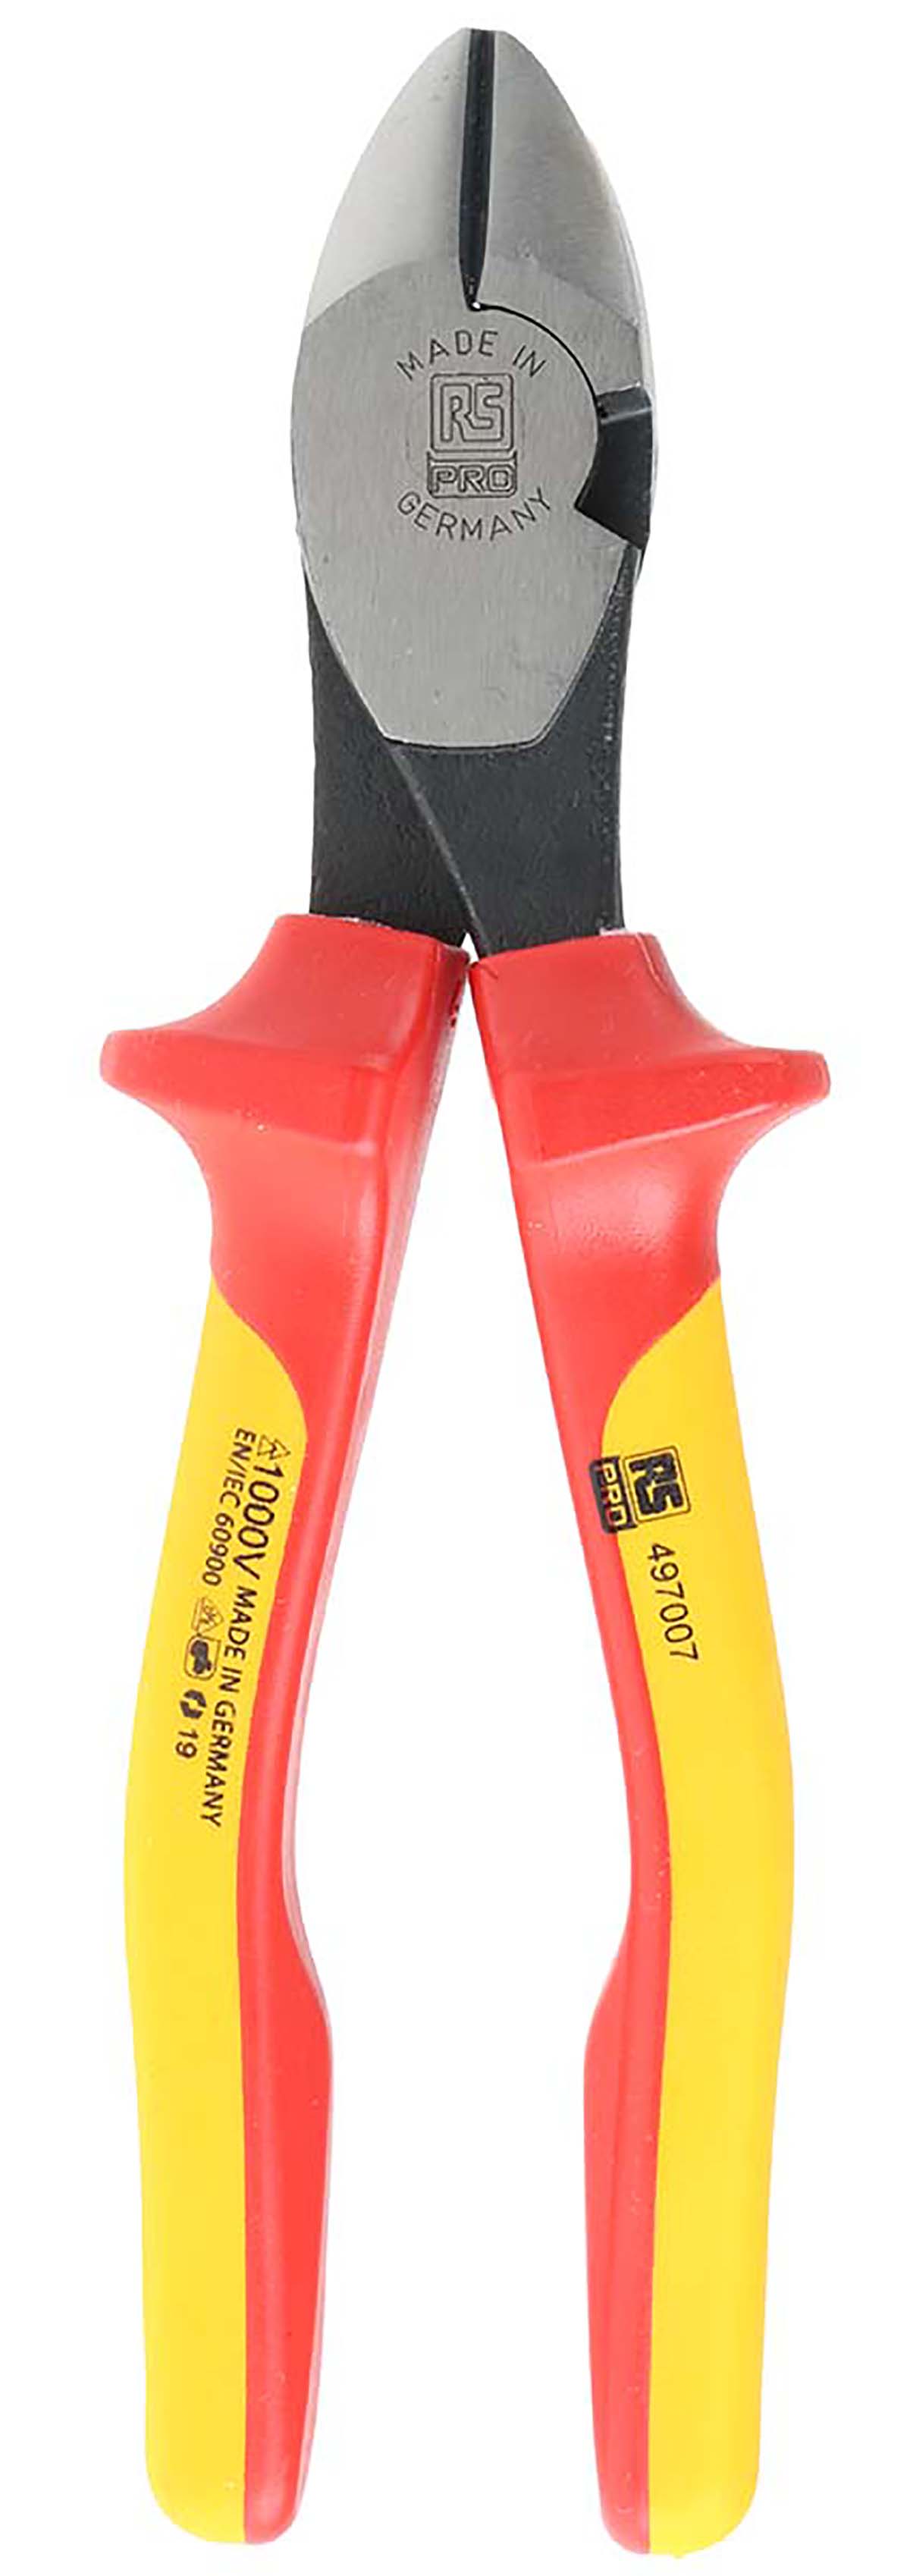 RS PRO VDE/1000V Insulated 180 mm Diagonal Cutters